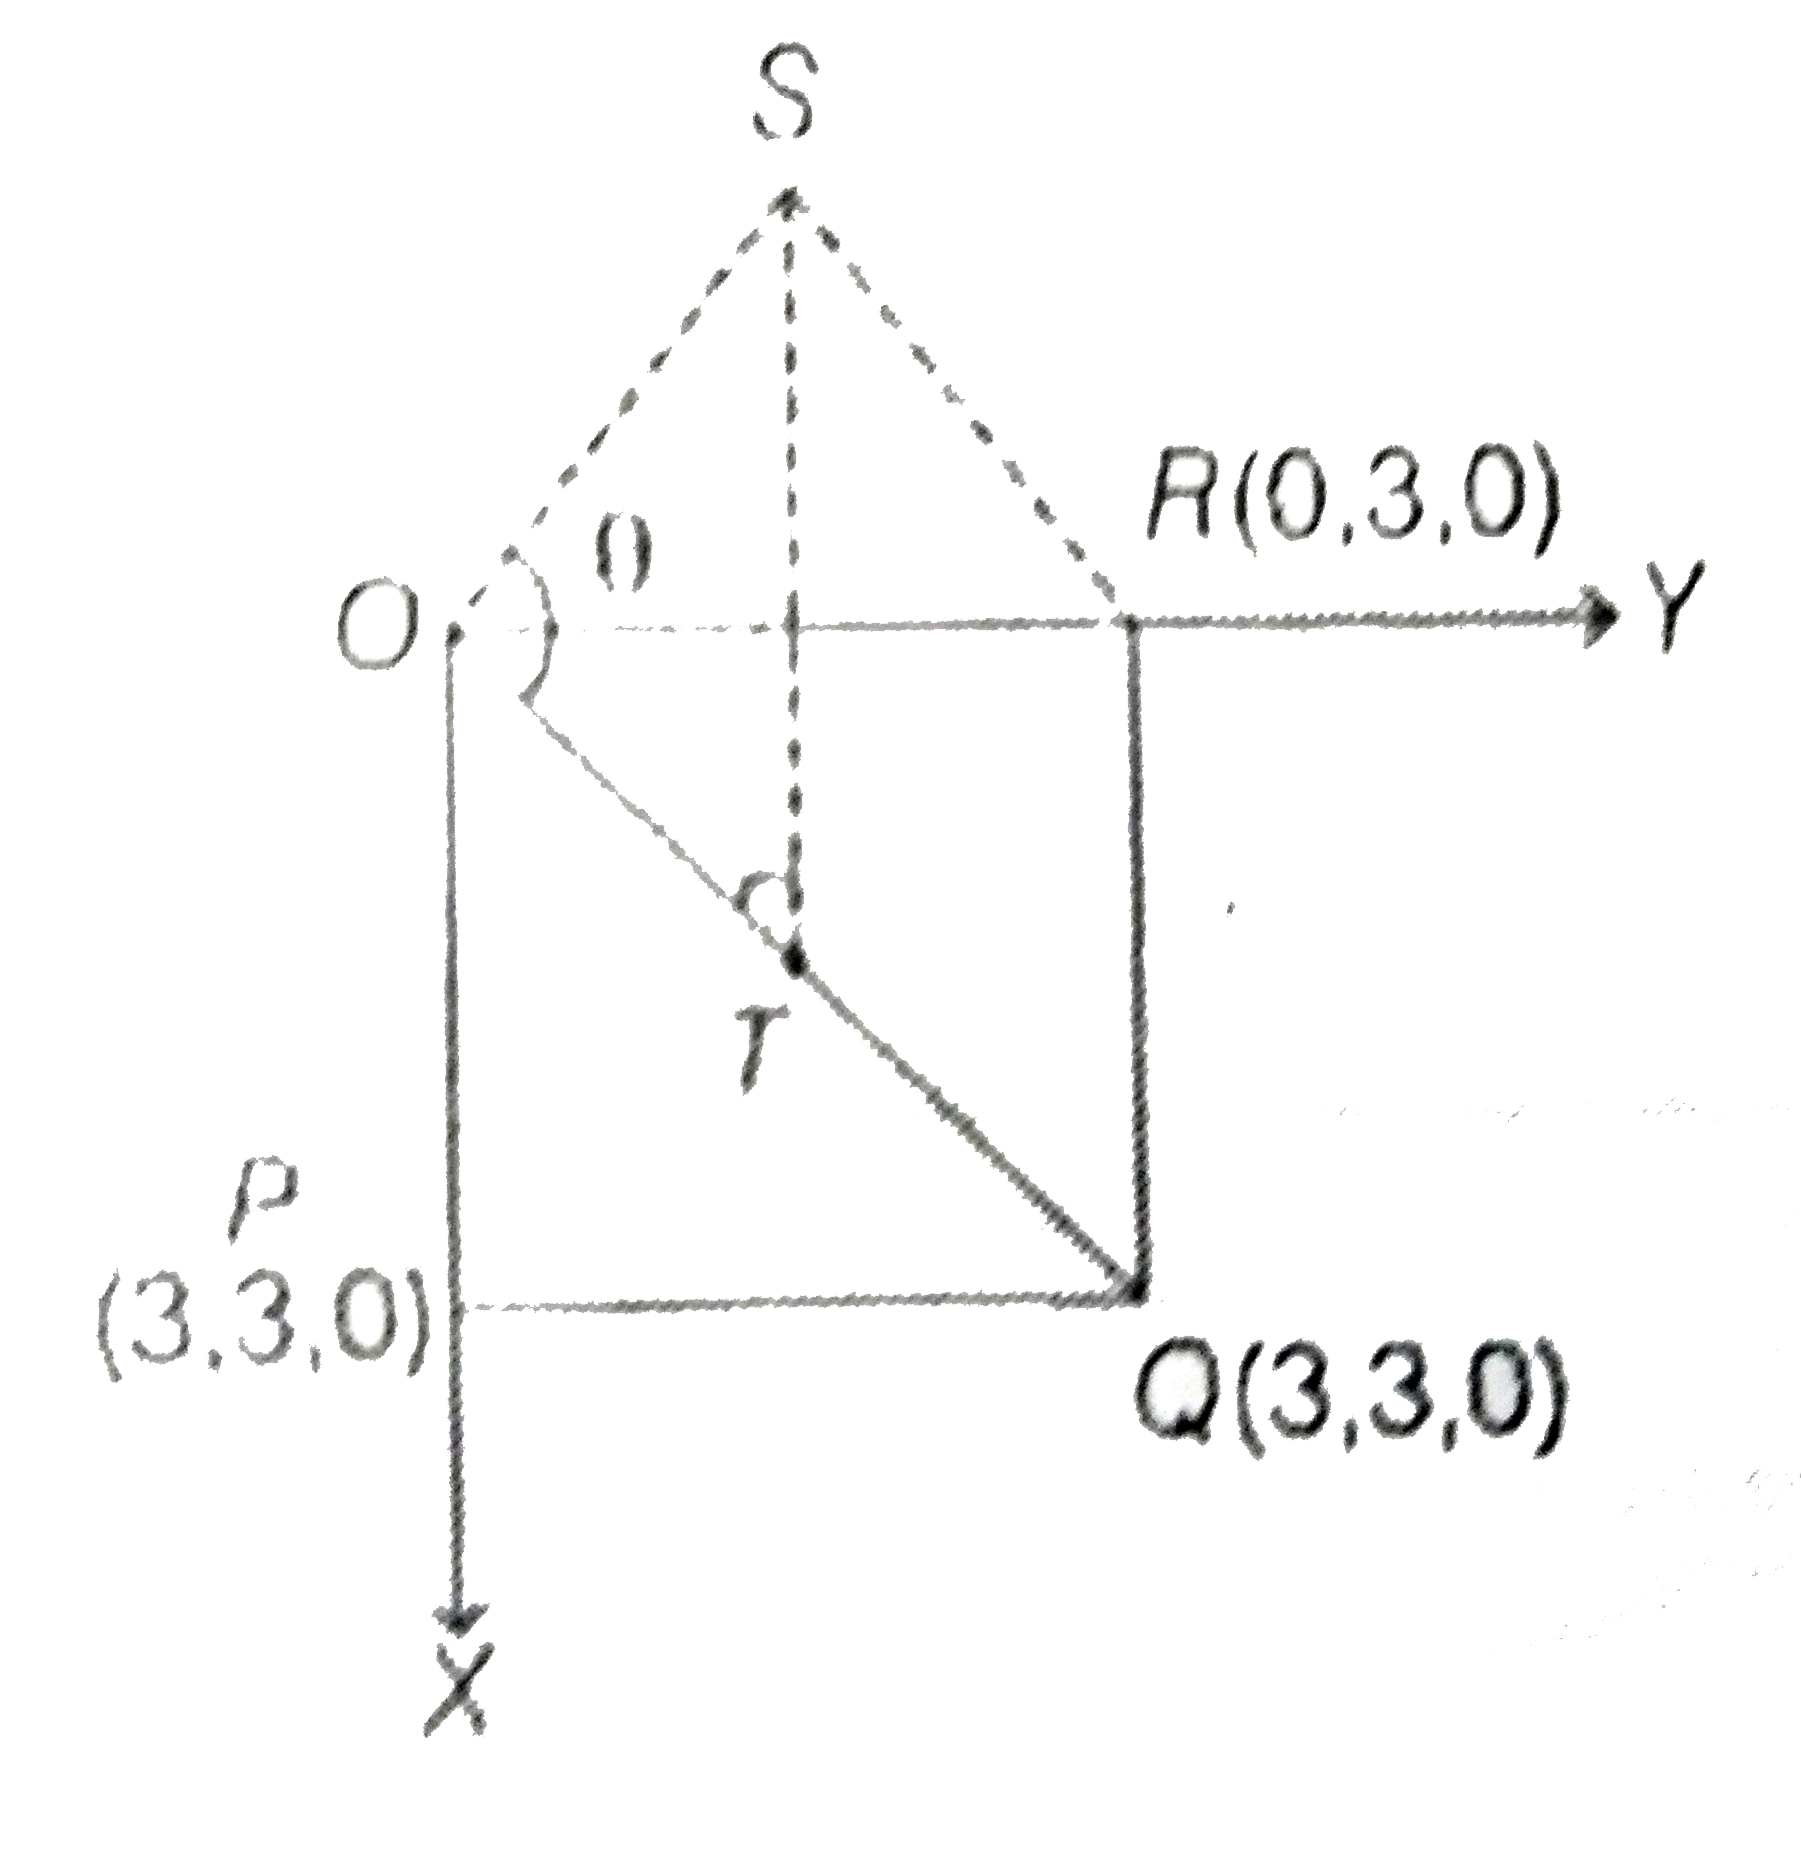 Consider A Pyramid Opqrs Located In The First Octant X 0 Y